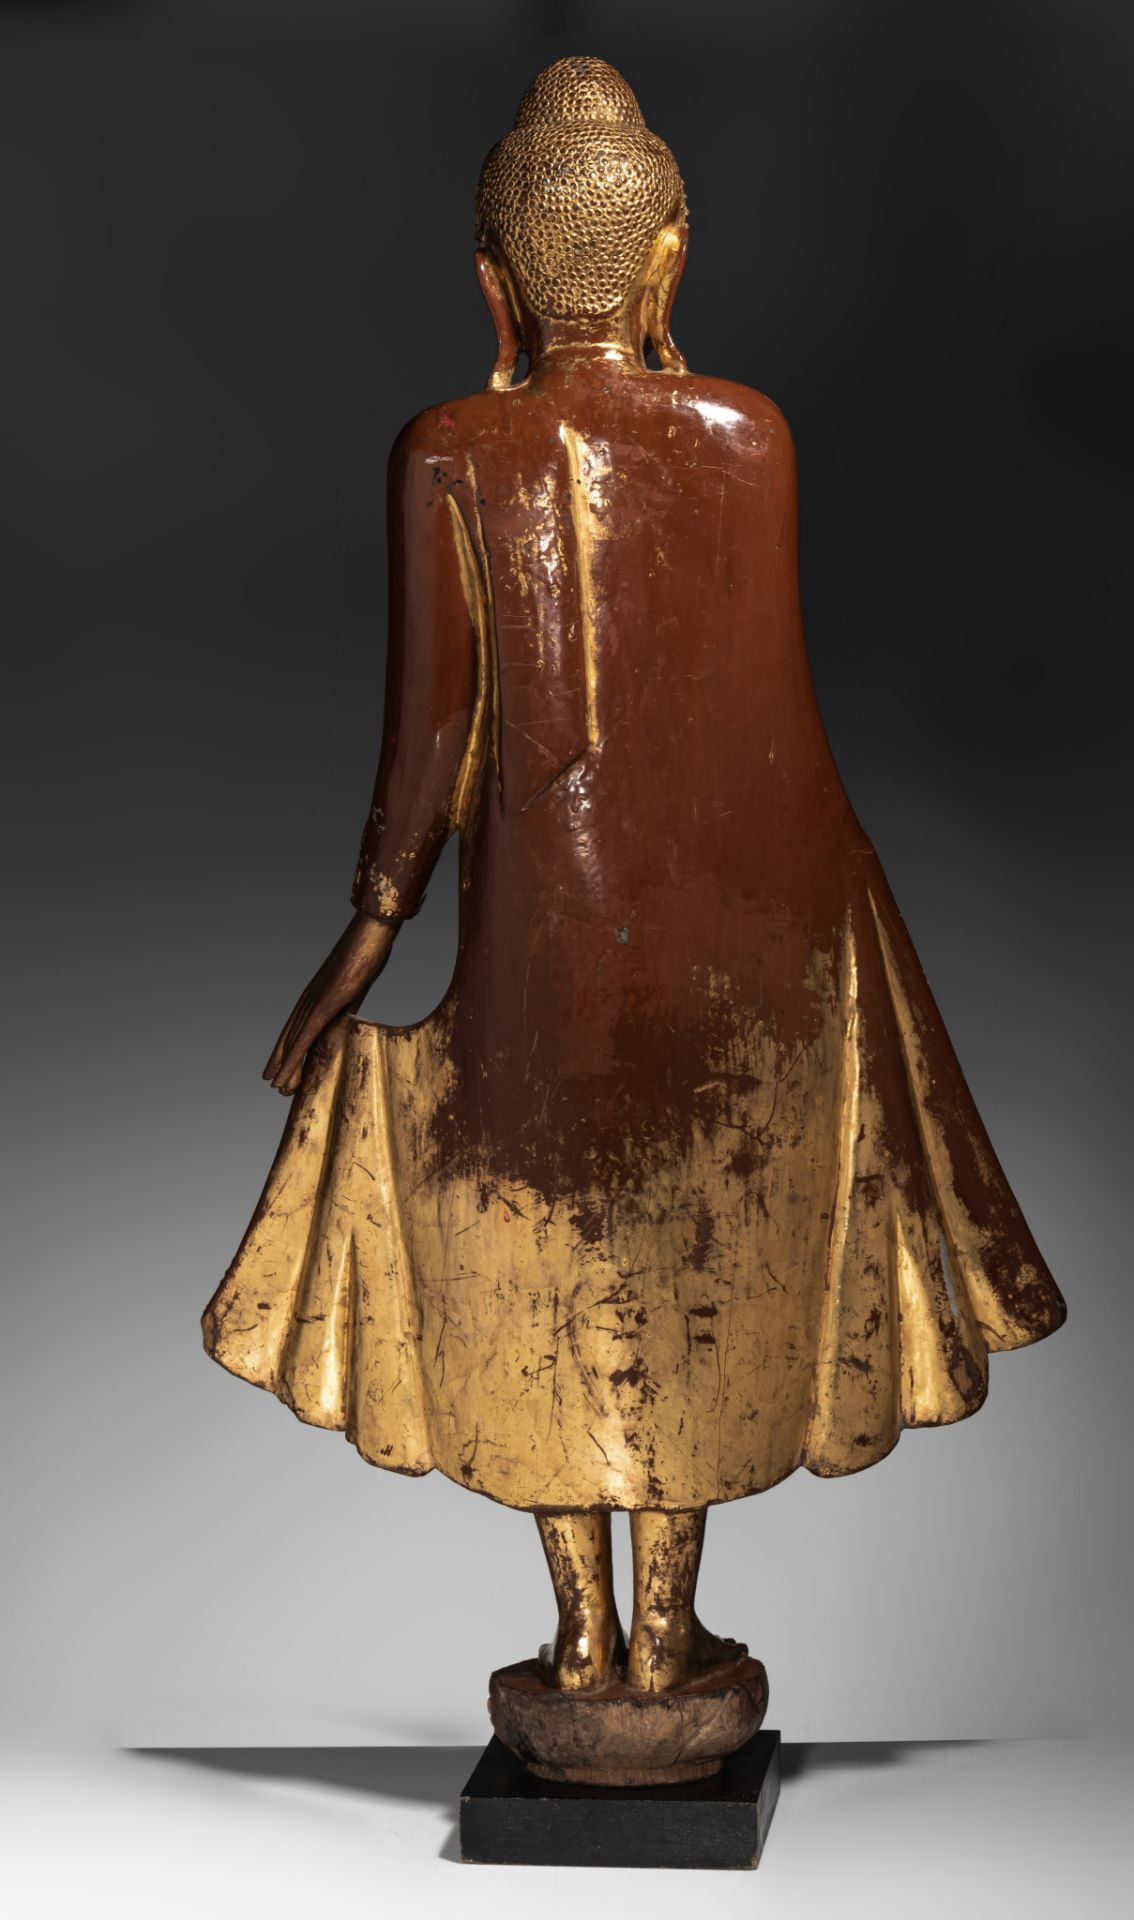 A Burmese gilt lacquered wooden figure of standing Buddha, inlaid with glass beads, 19thC, H 103,5 c - Image 4 of 5